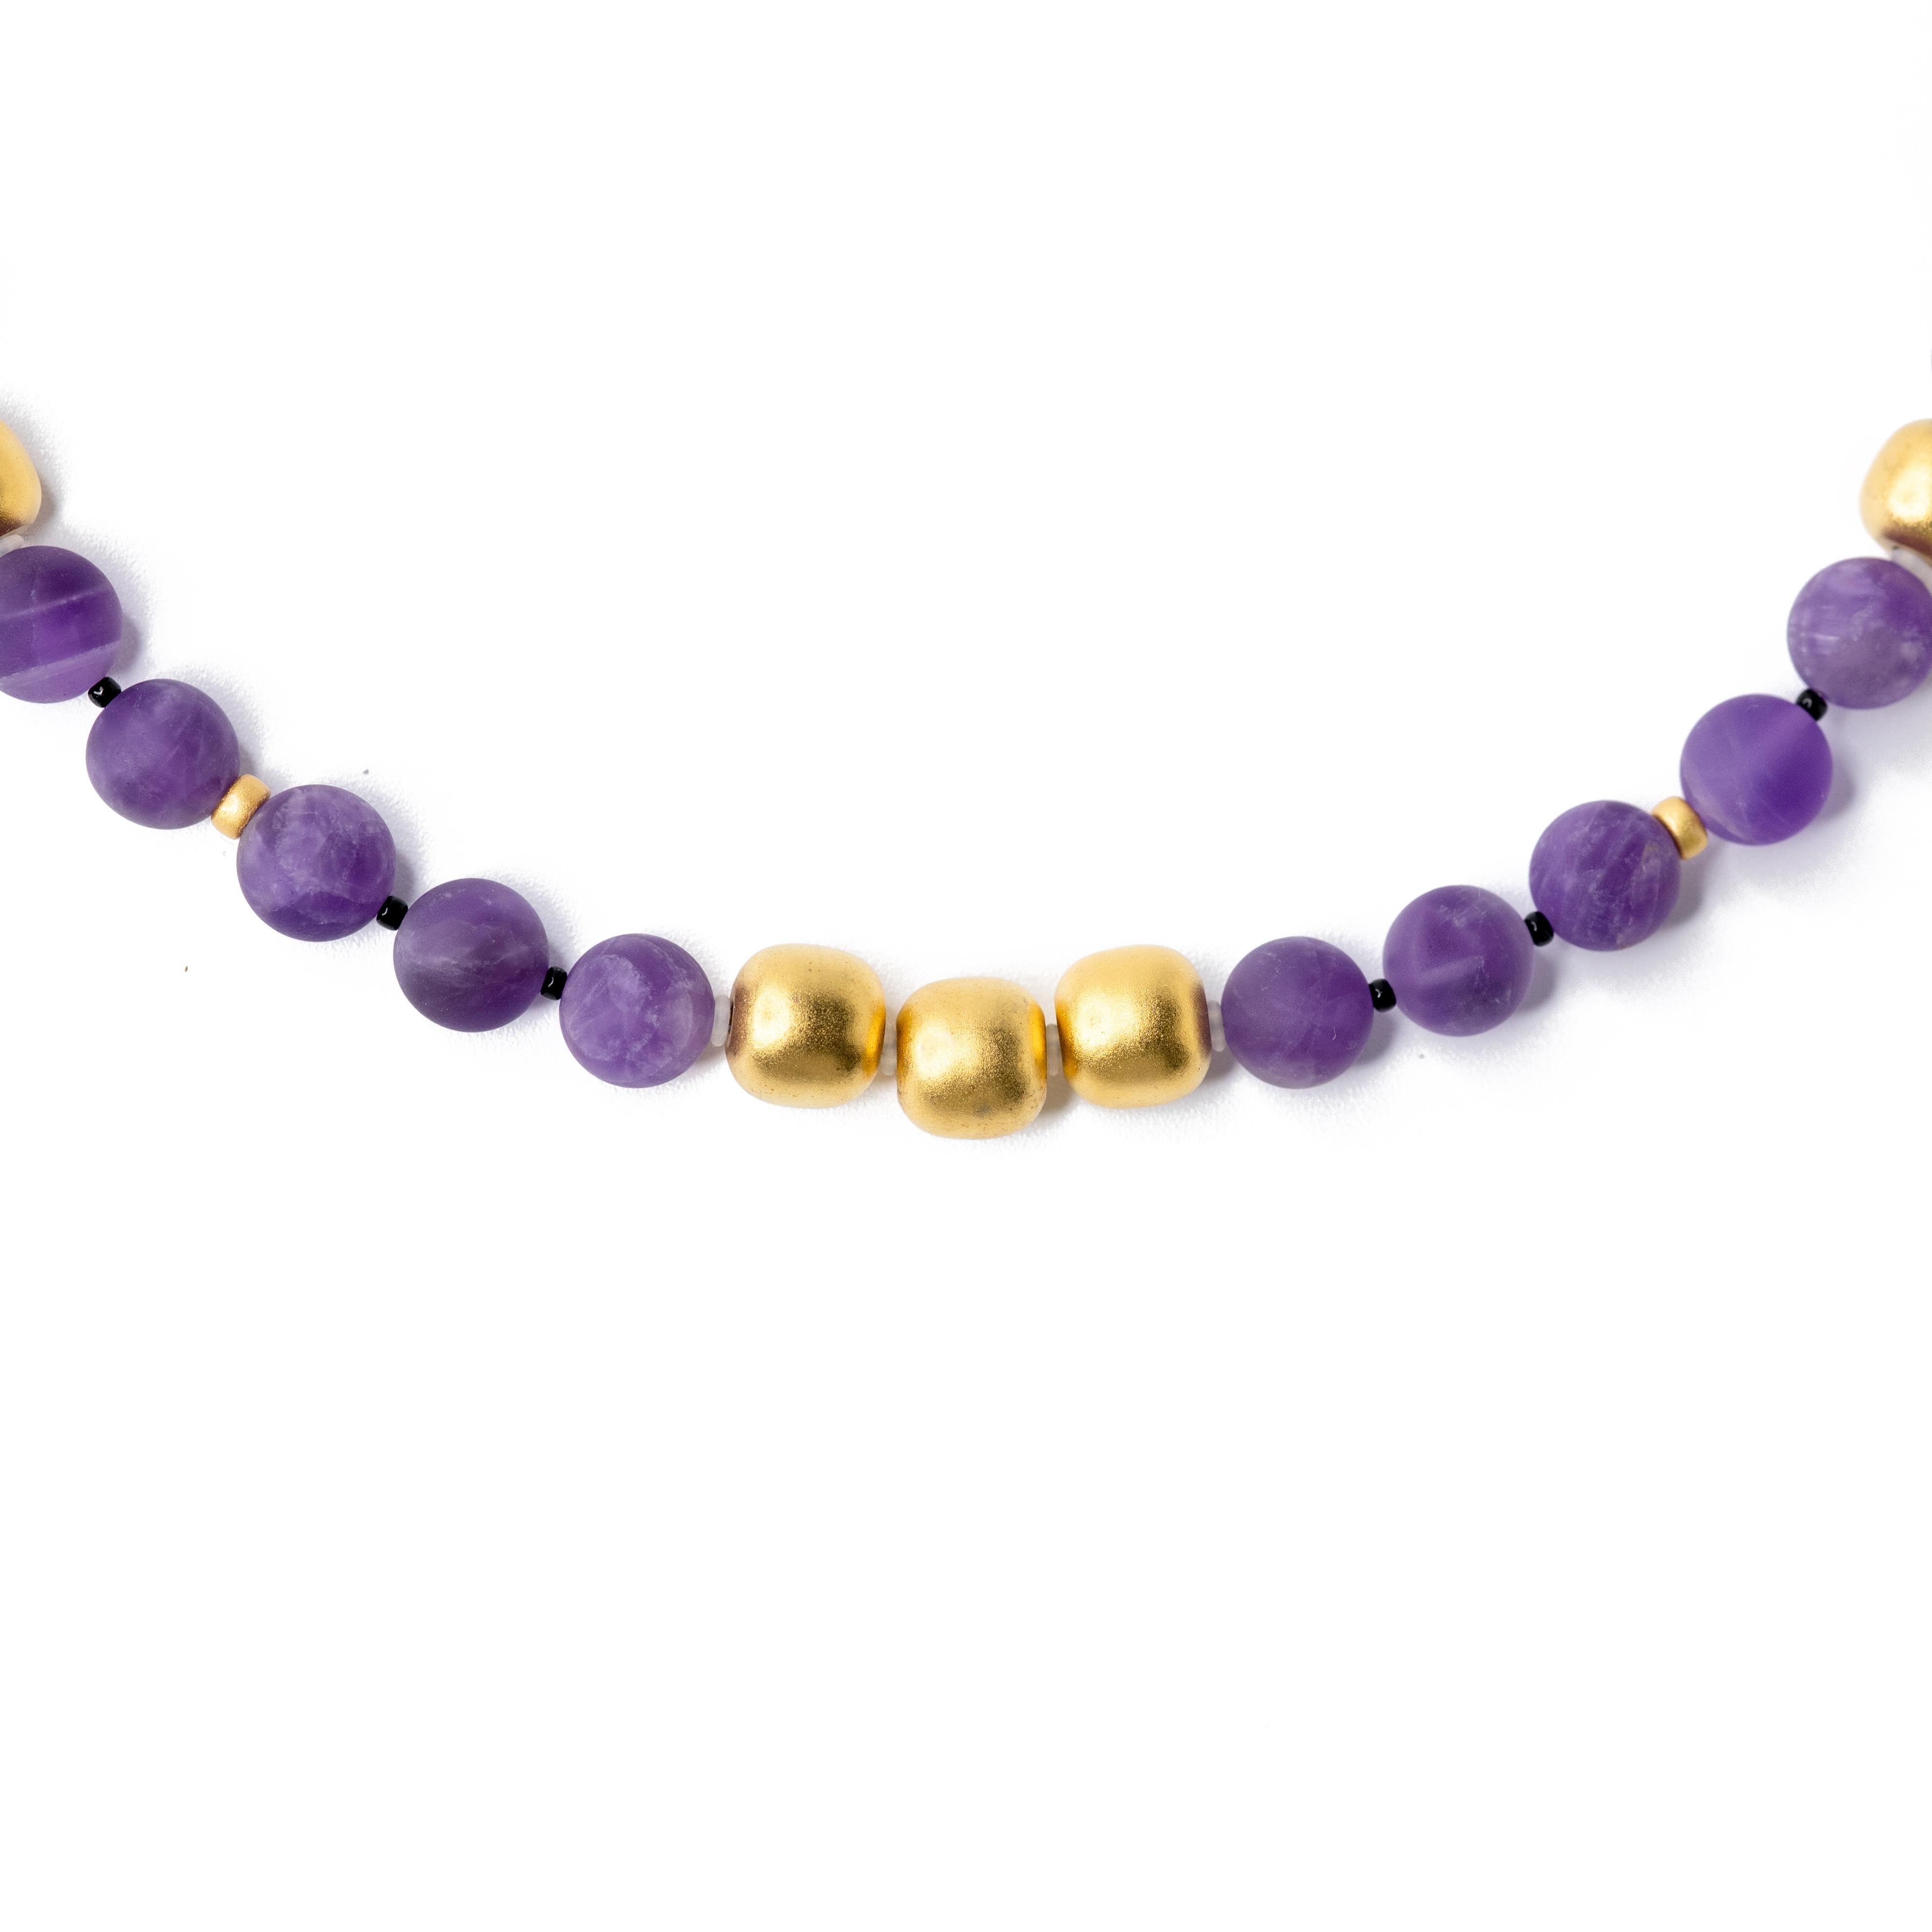 This necklace is crafted from Amethyst Crystal Beads, and Gold Plated Brass Beads, inspired by artist Erin Hanson's Famous Painting 